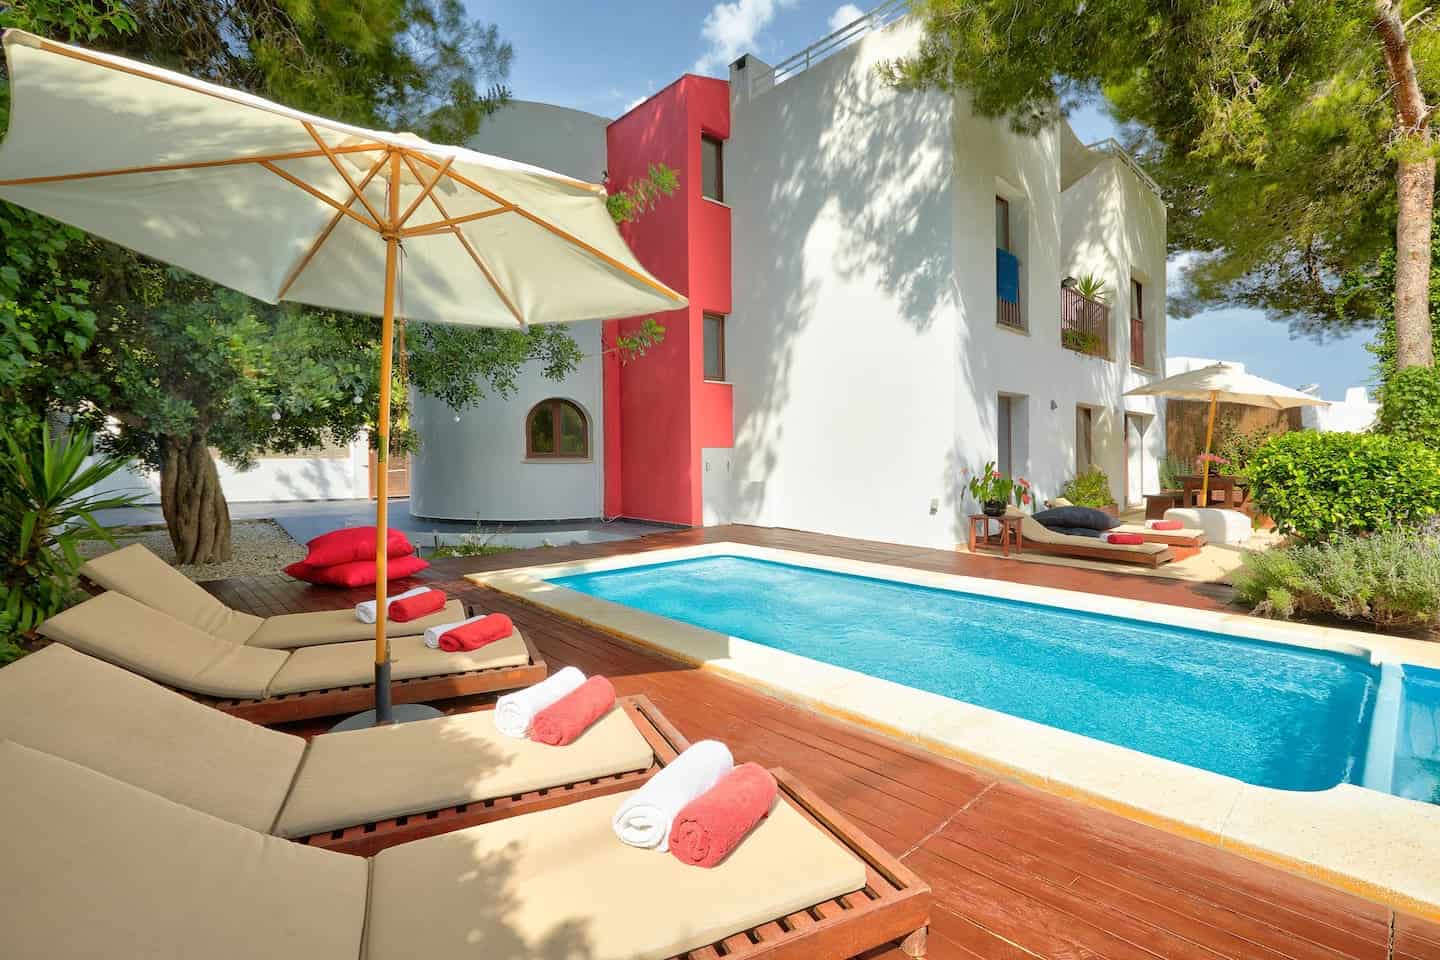 Image of Airbnb rental in Ibiza, Spain